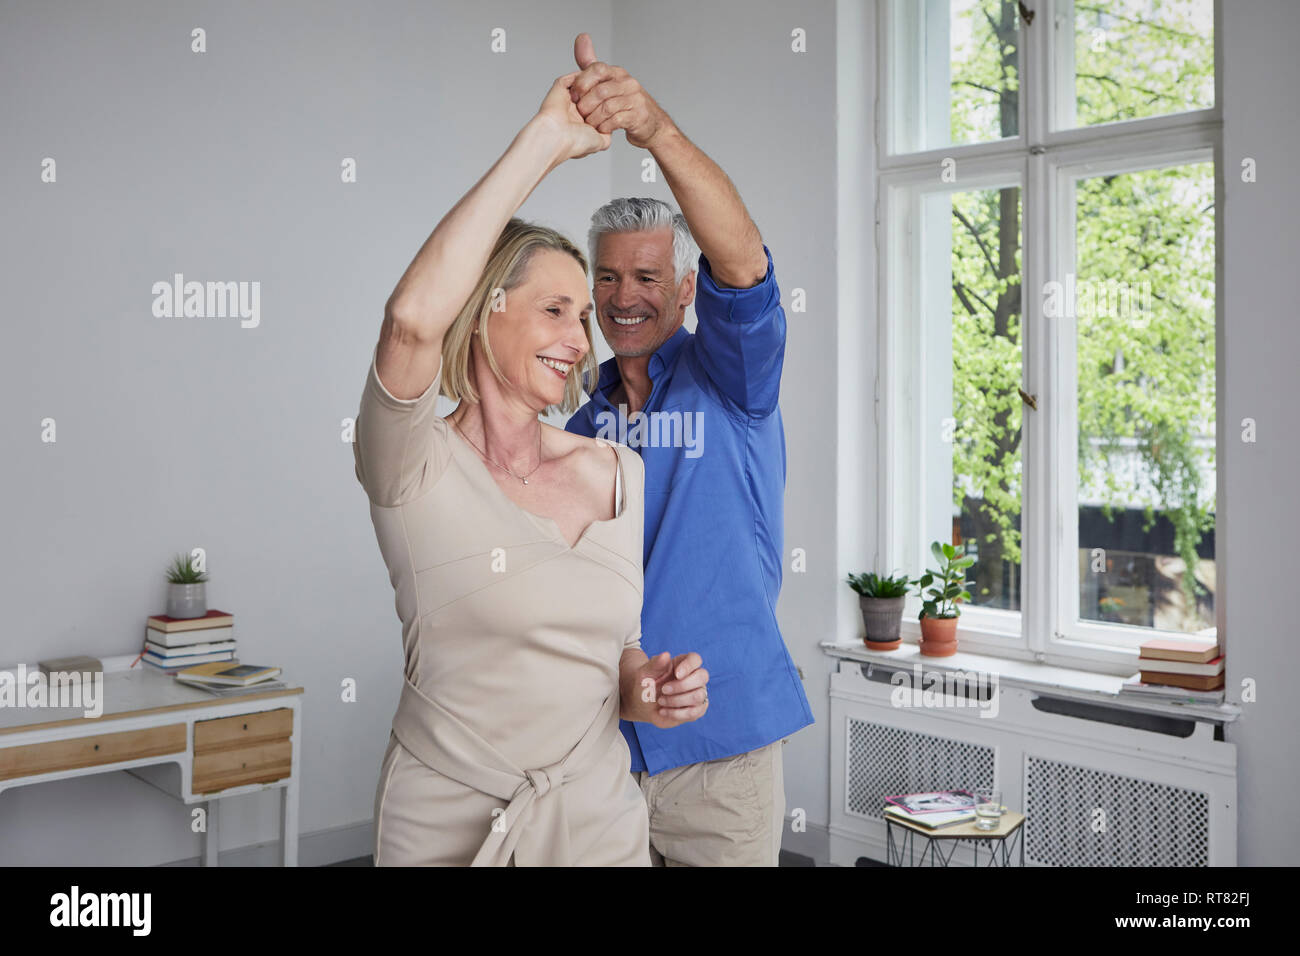 Mature couple dancing at home Banque D'Images